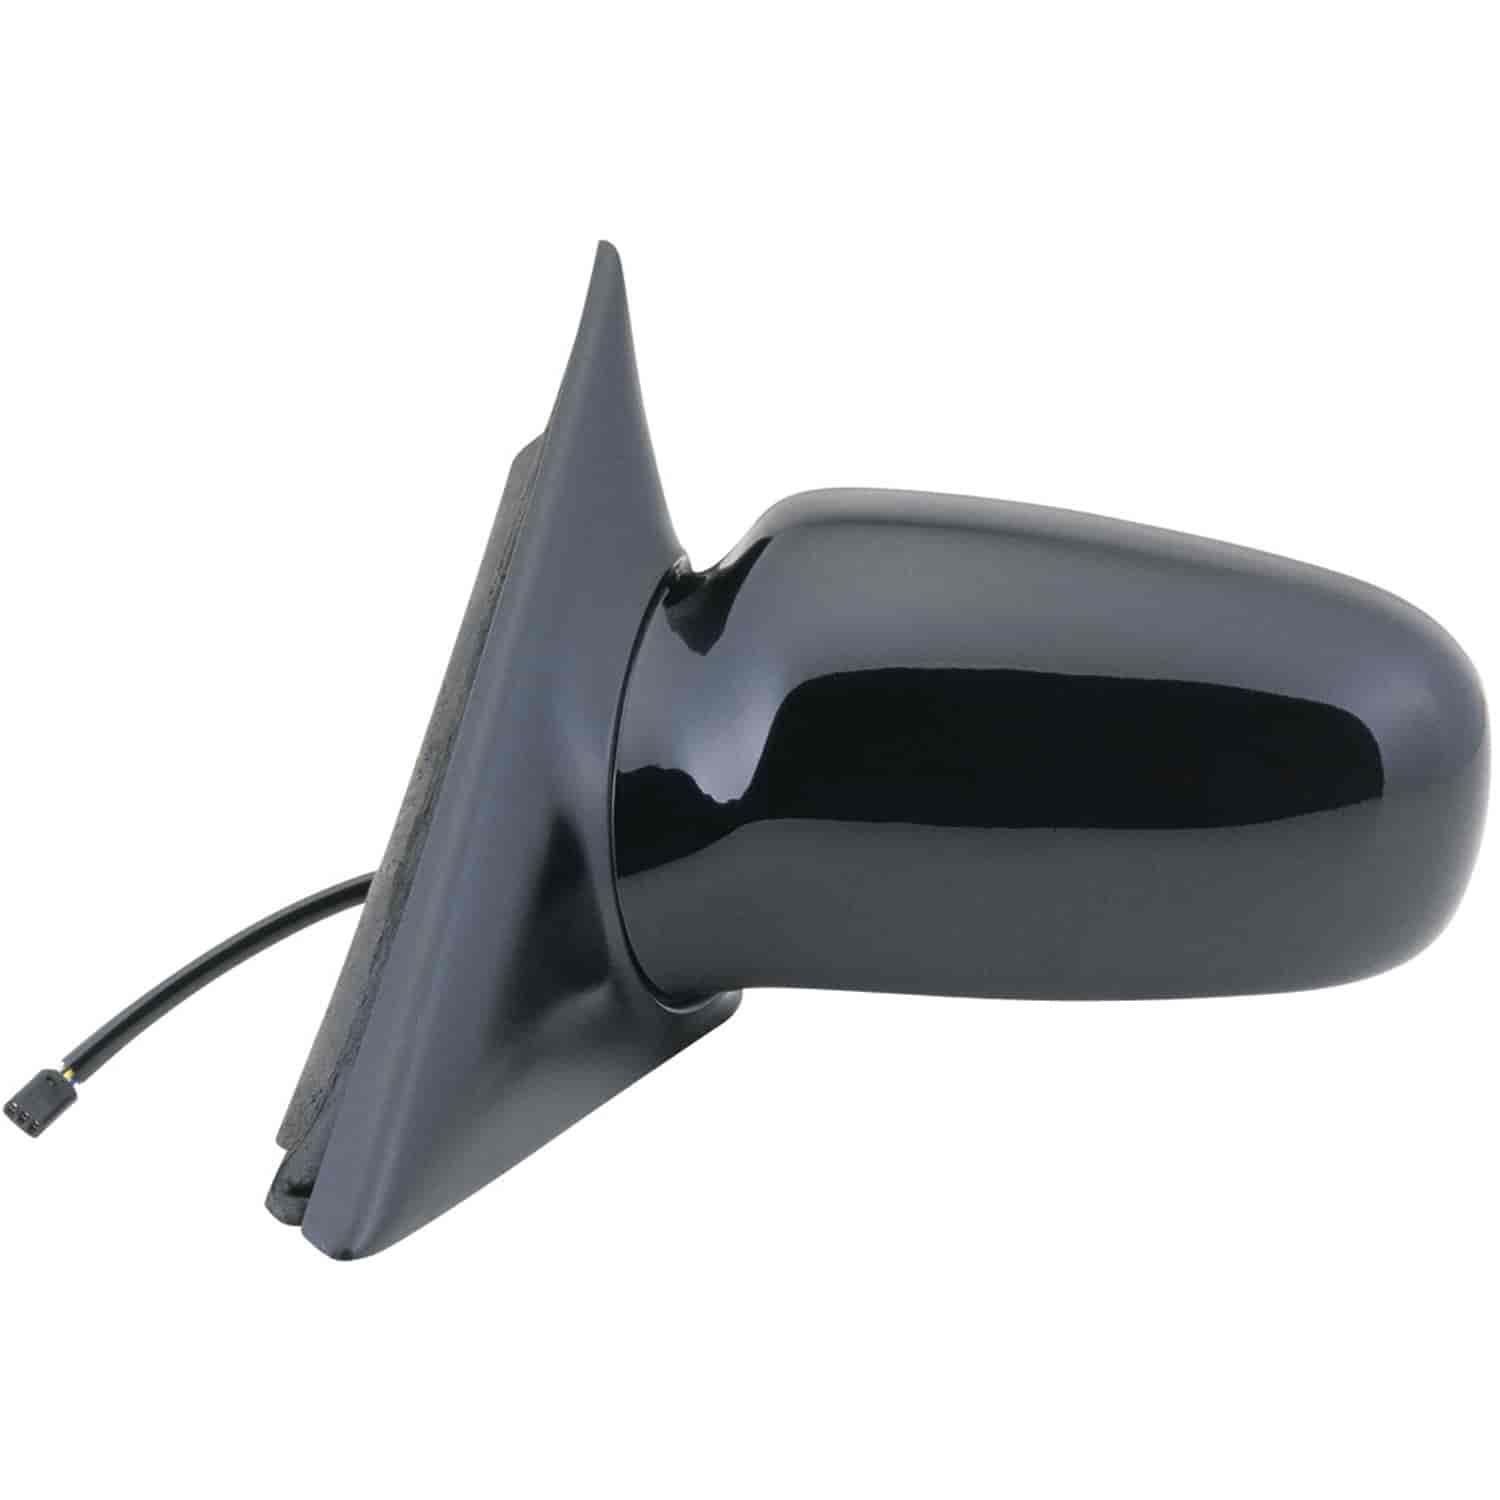 OEM Style Replacement mirror for 97-03 Chevy Malibu 04-05 Malibu Classic 97-99 Olds. Cutlass driver